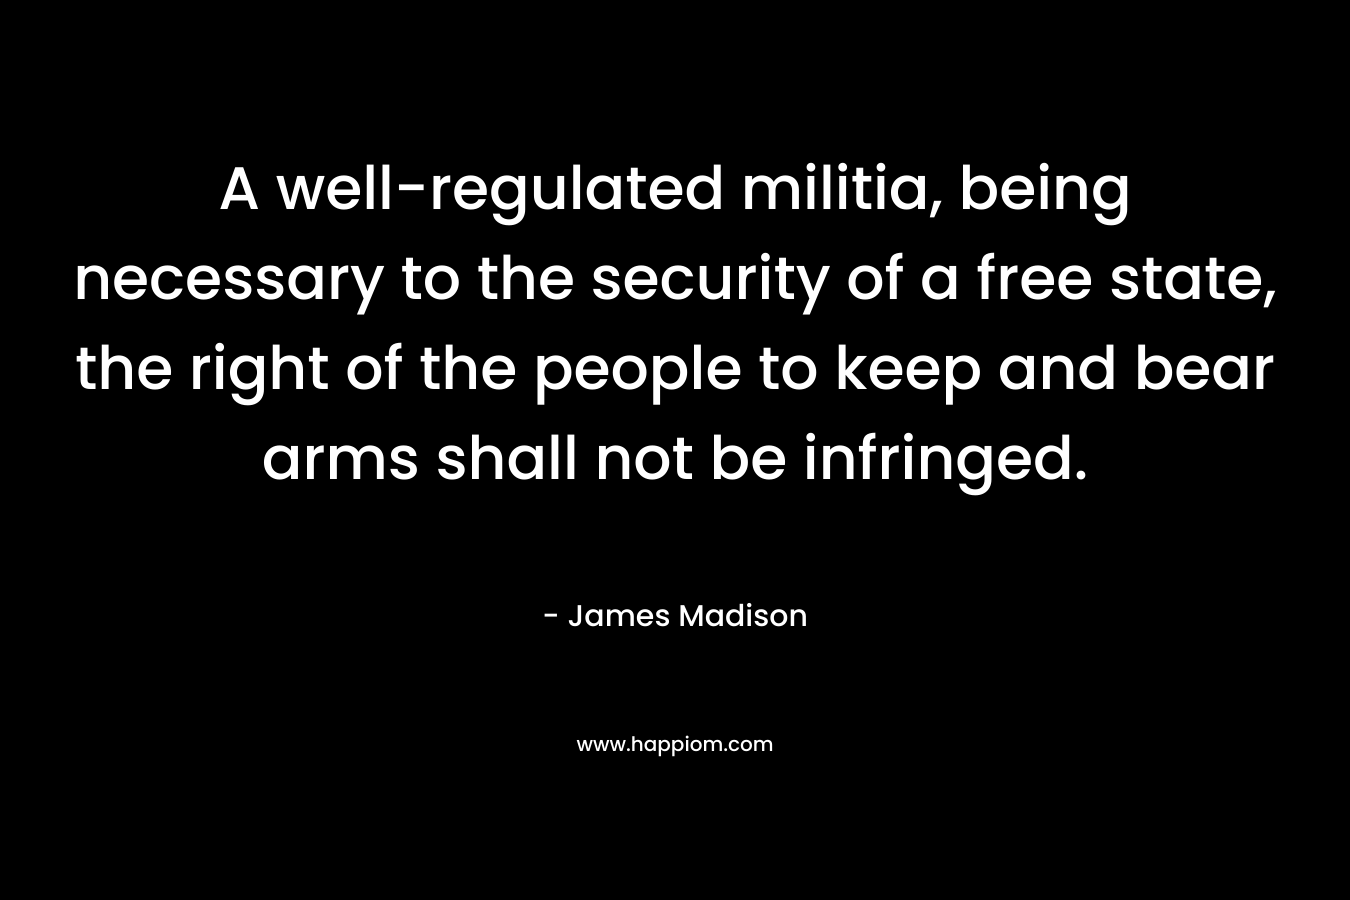 A well-regulated militia, being necessary to the security of a free state, the right of the people to keep and bear arms shall not be infringed. – James Madison